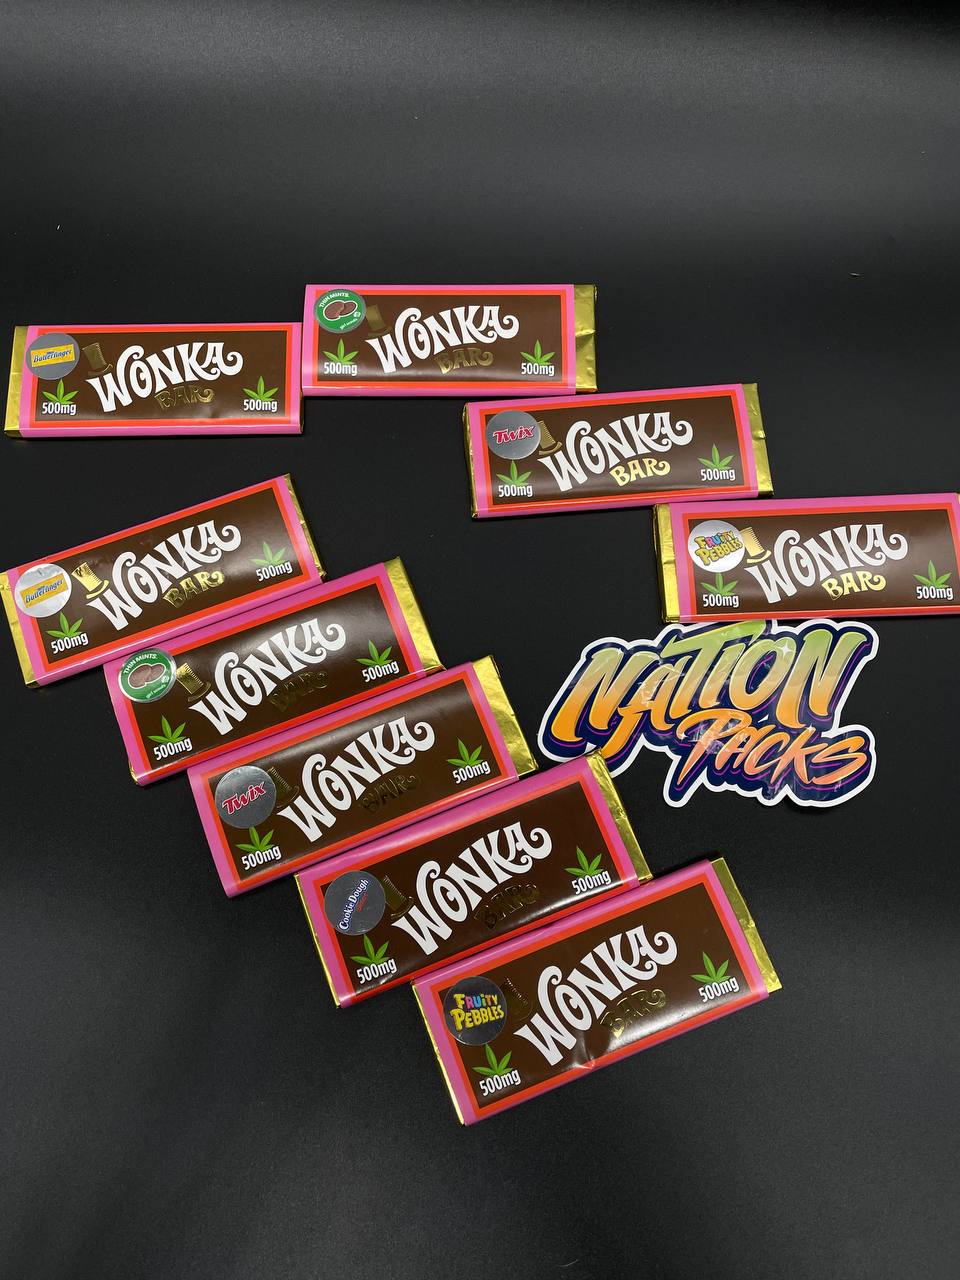 wonka bars - Get all Packs With The Nation Packs LA